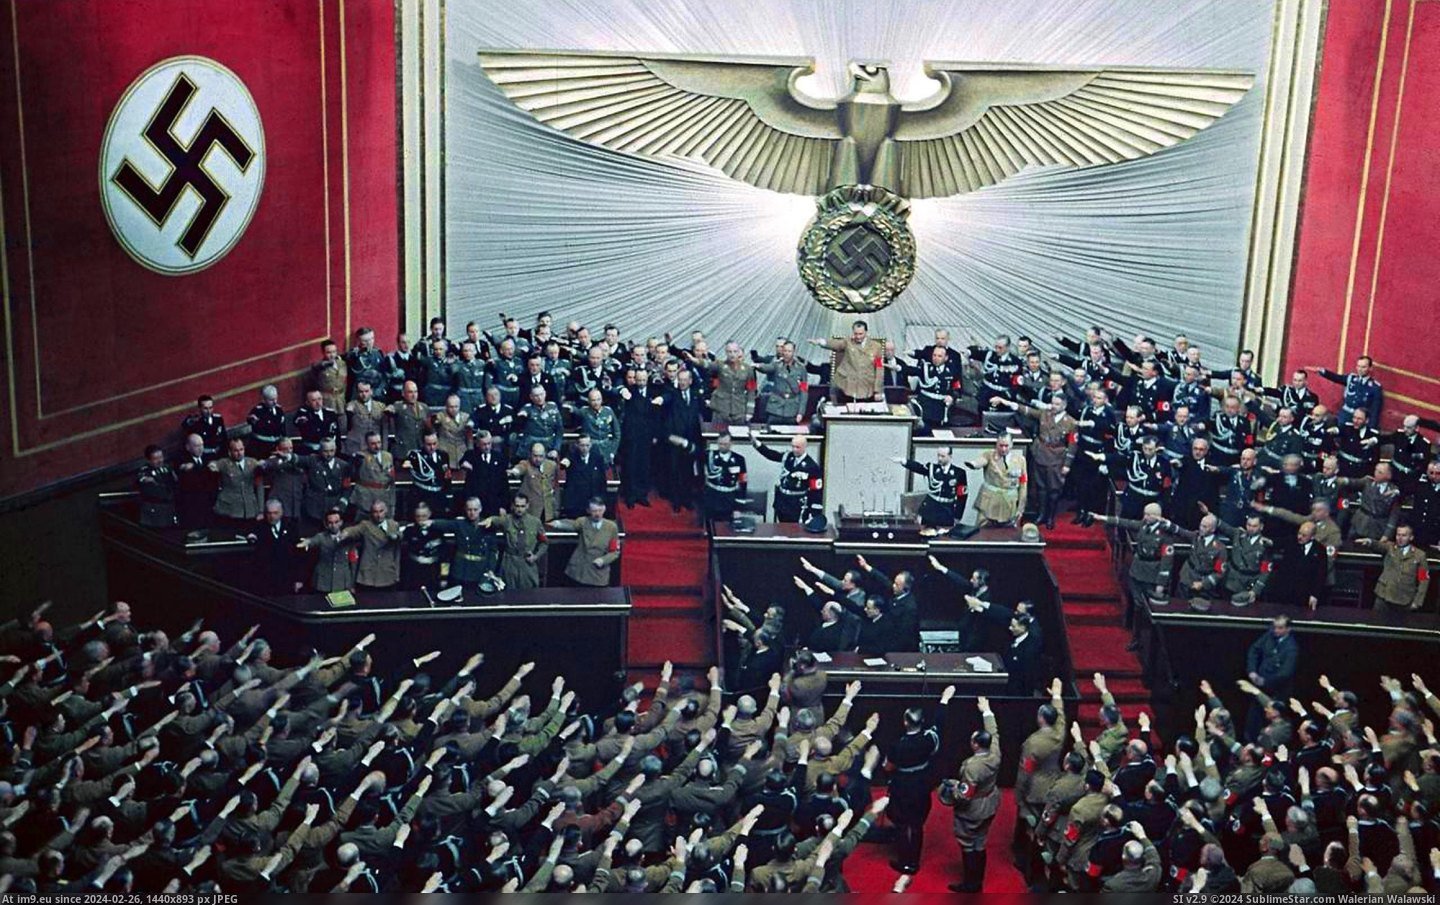 #Salute #D4xil72 #Themistrunsred #Reichstag Reichstag Salute By Themistrunsred D4Xil72 Pic. (Bild von album Historical photos of nazi Germany))